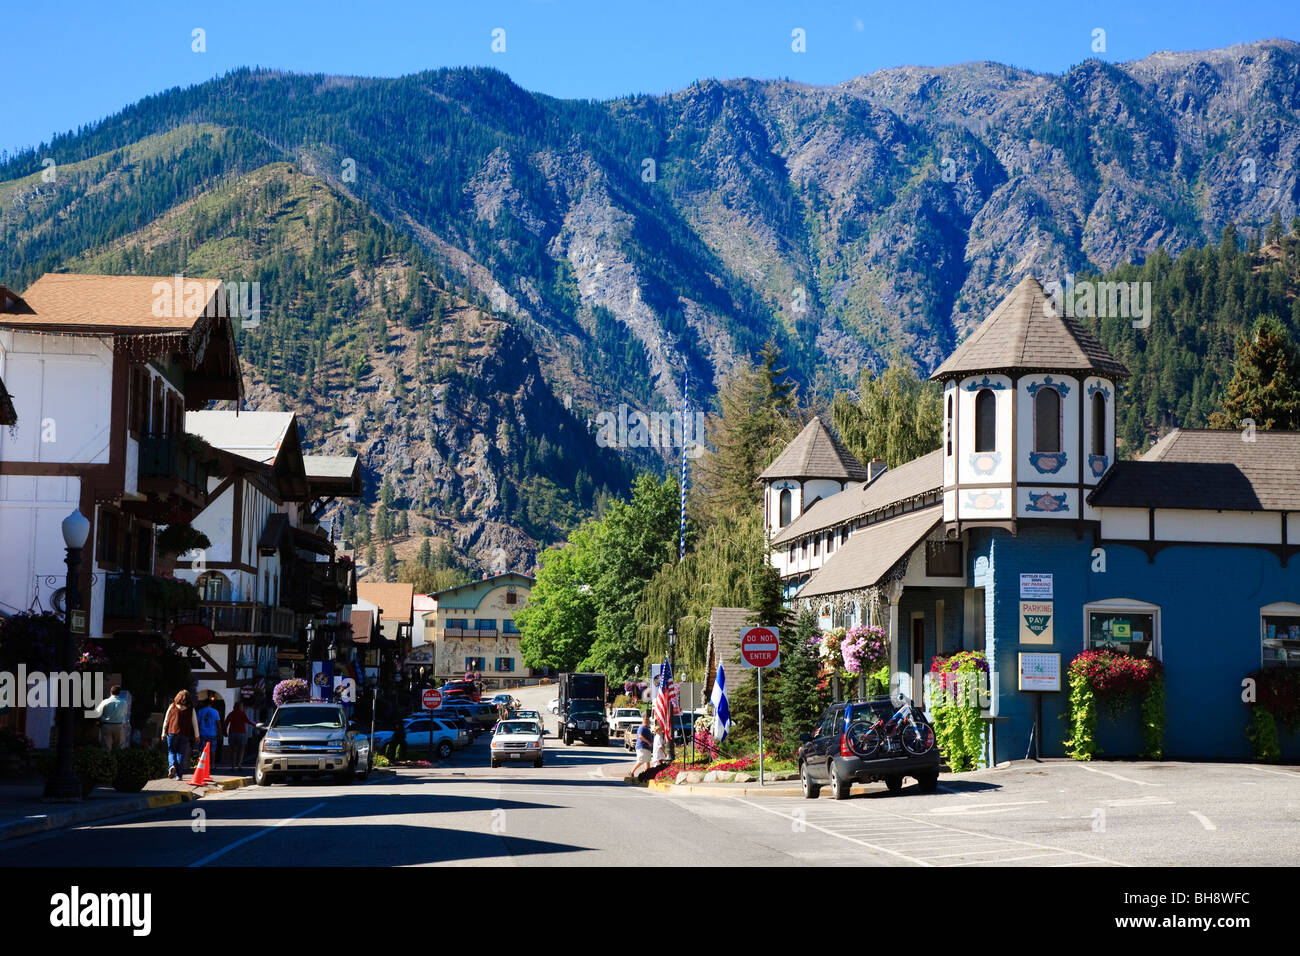 View looking down Front Street, Leavenworth a Bavarian styled town in Chelan County, Washington, United States Stock Photo